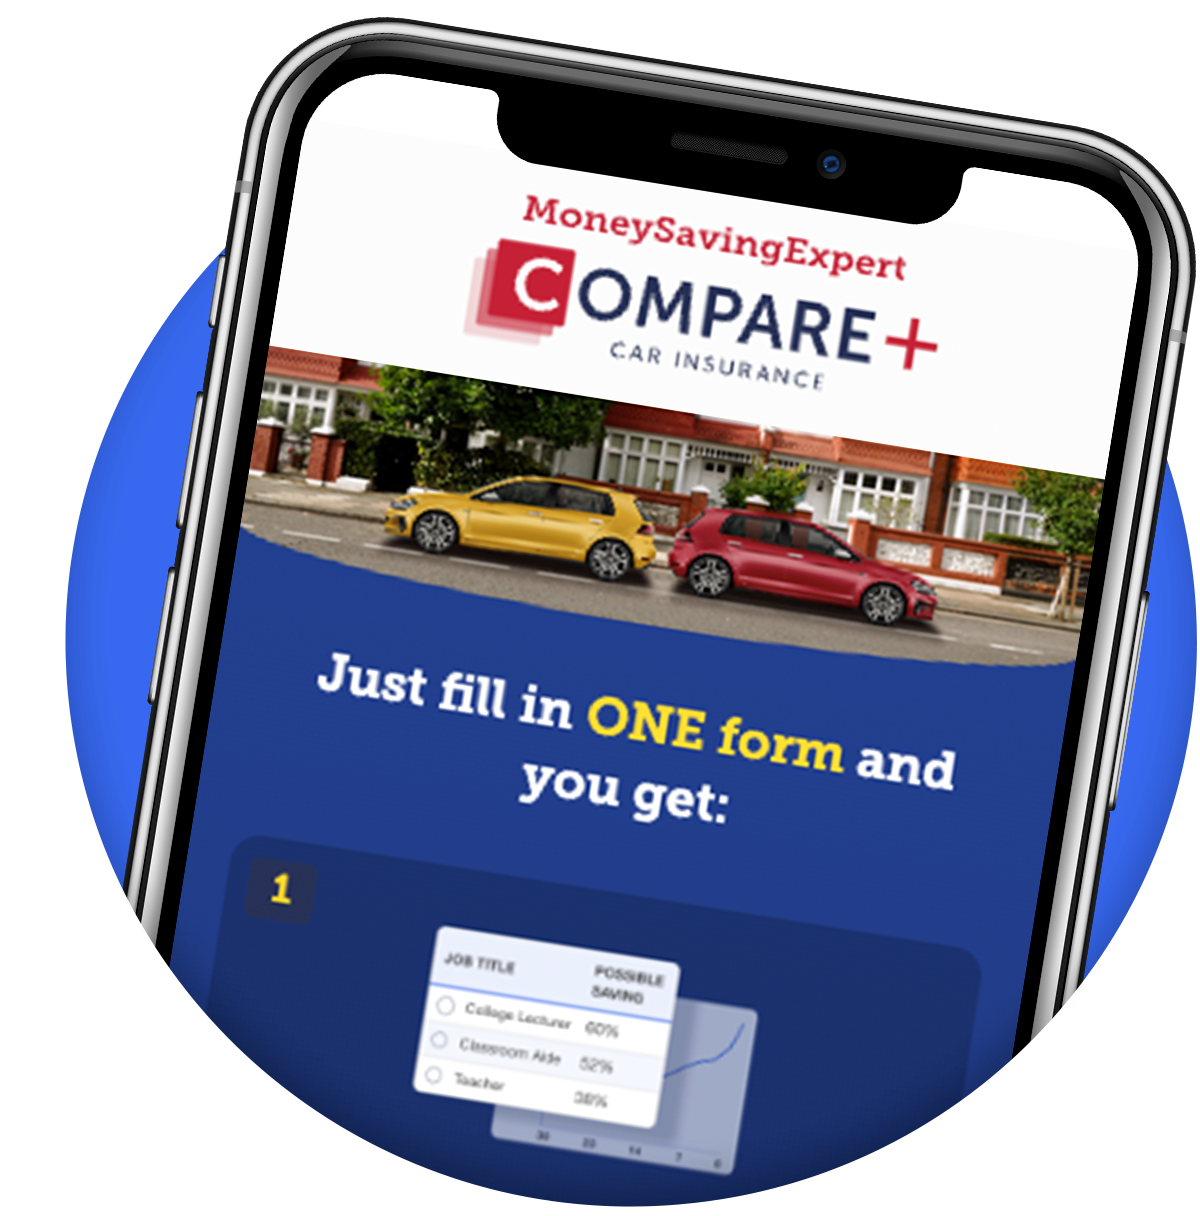 The MoneySavingExpert Compare+ Car Insurance tool. Text reads: "Just fill in one form and you get..."